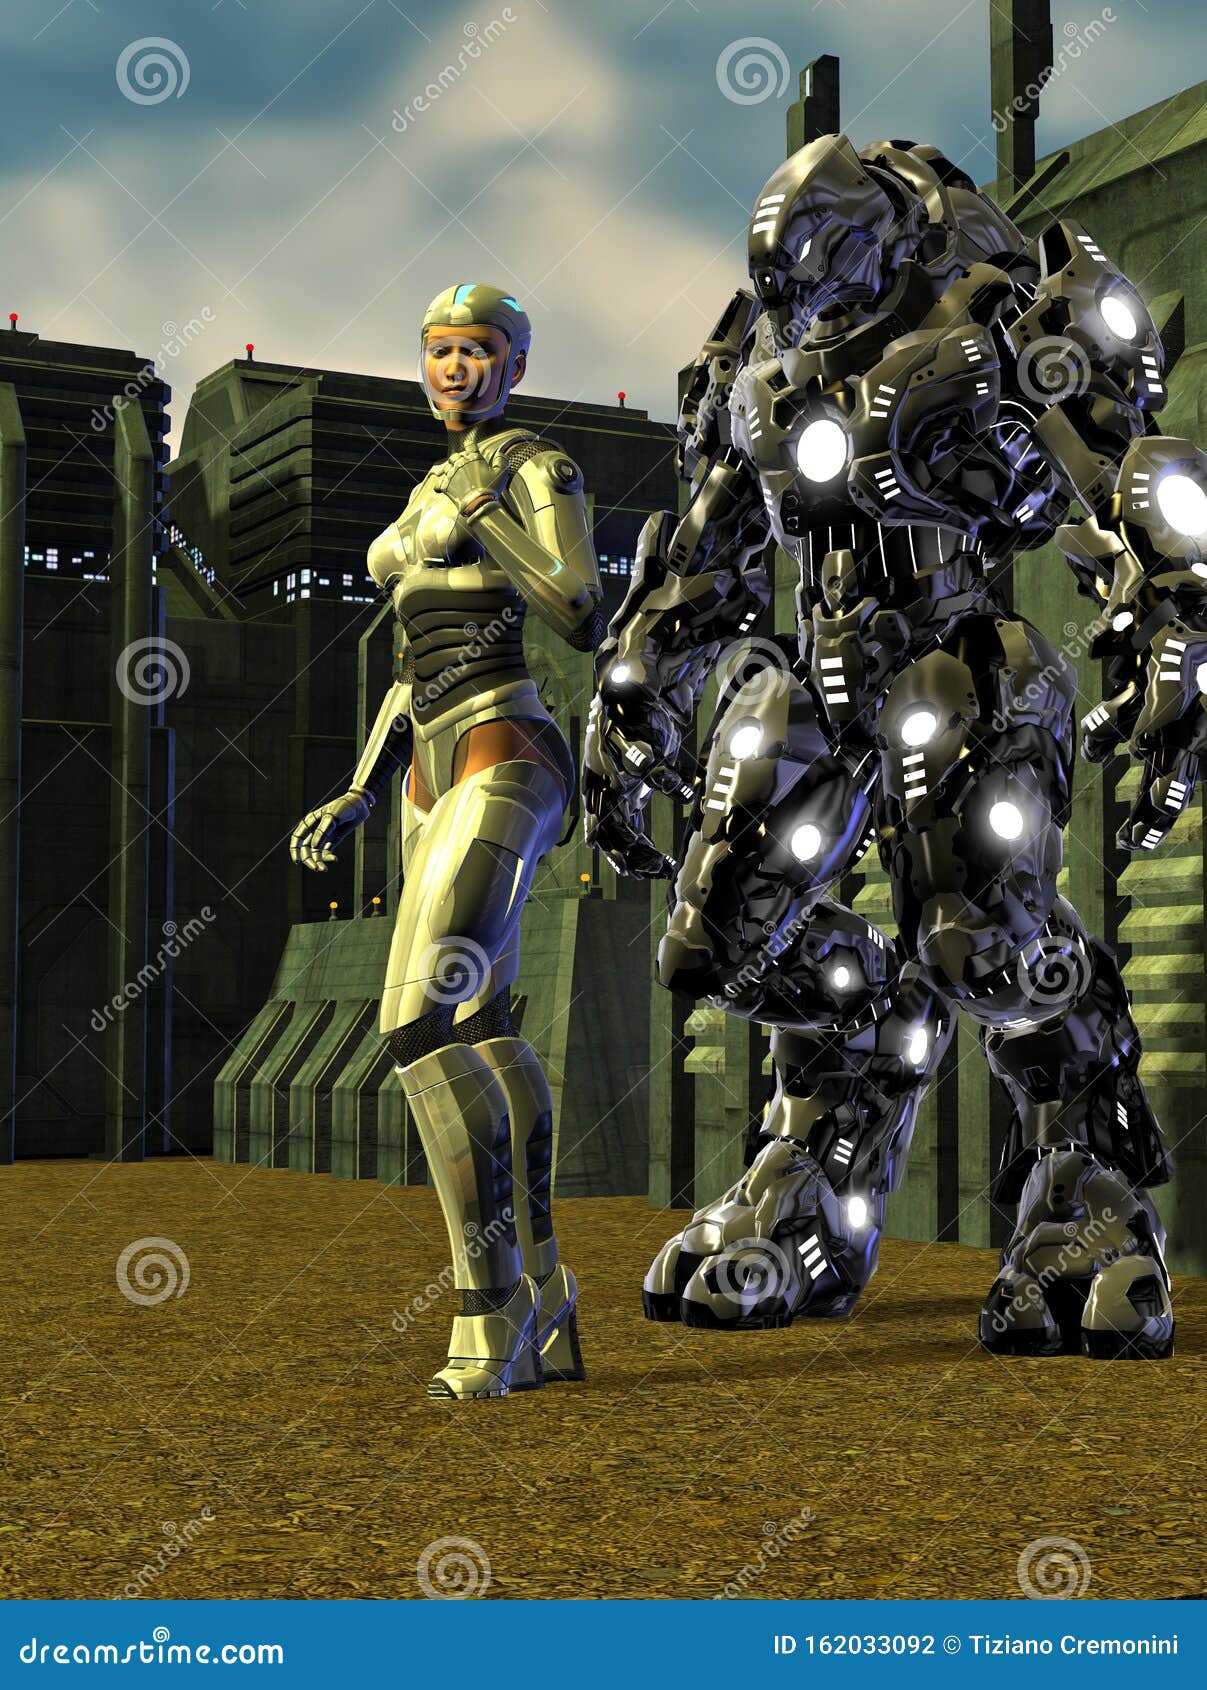 Woman with Futuristic Armor Together with a Combat Robot, Near a